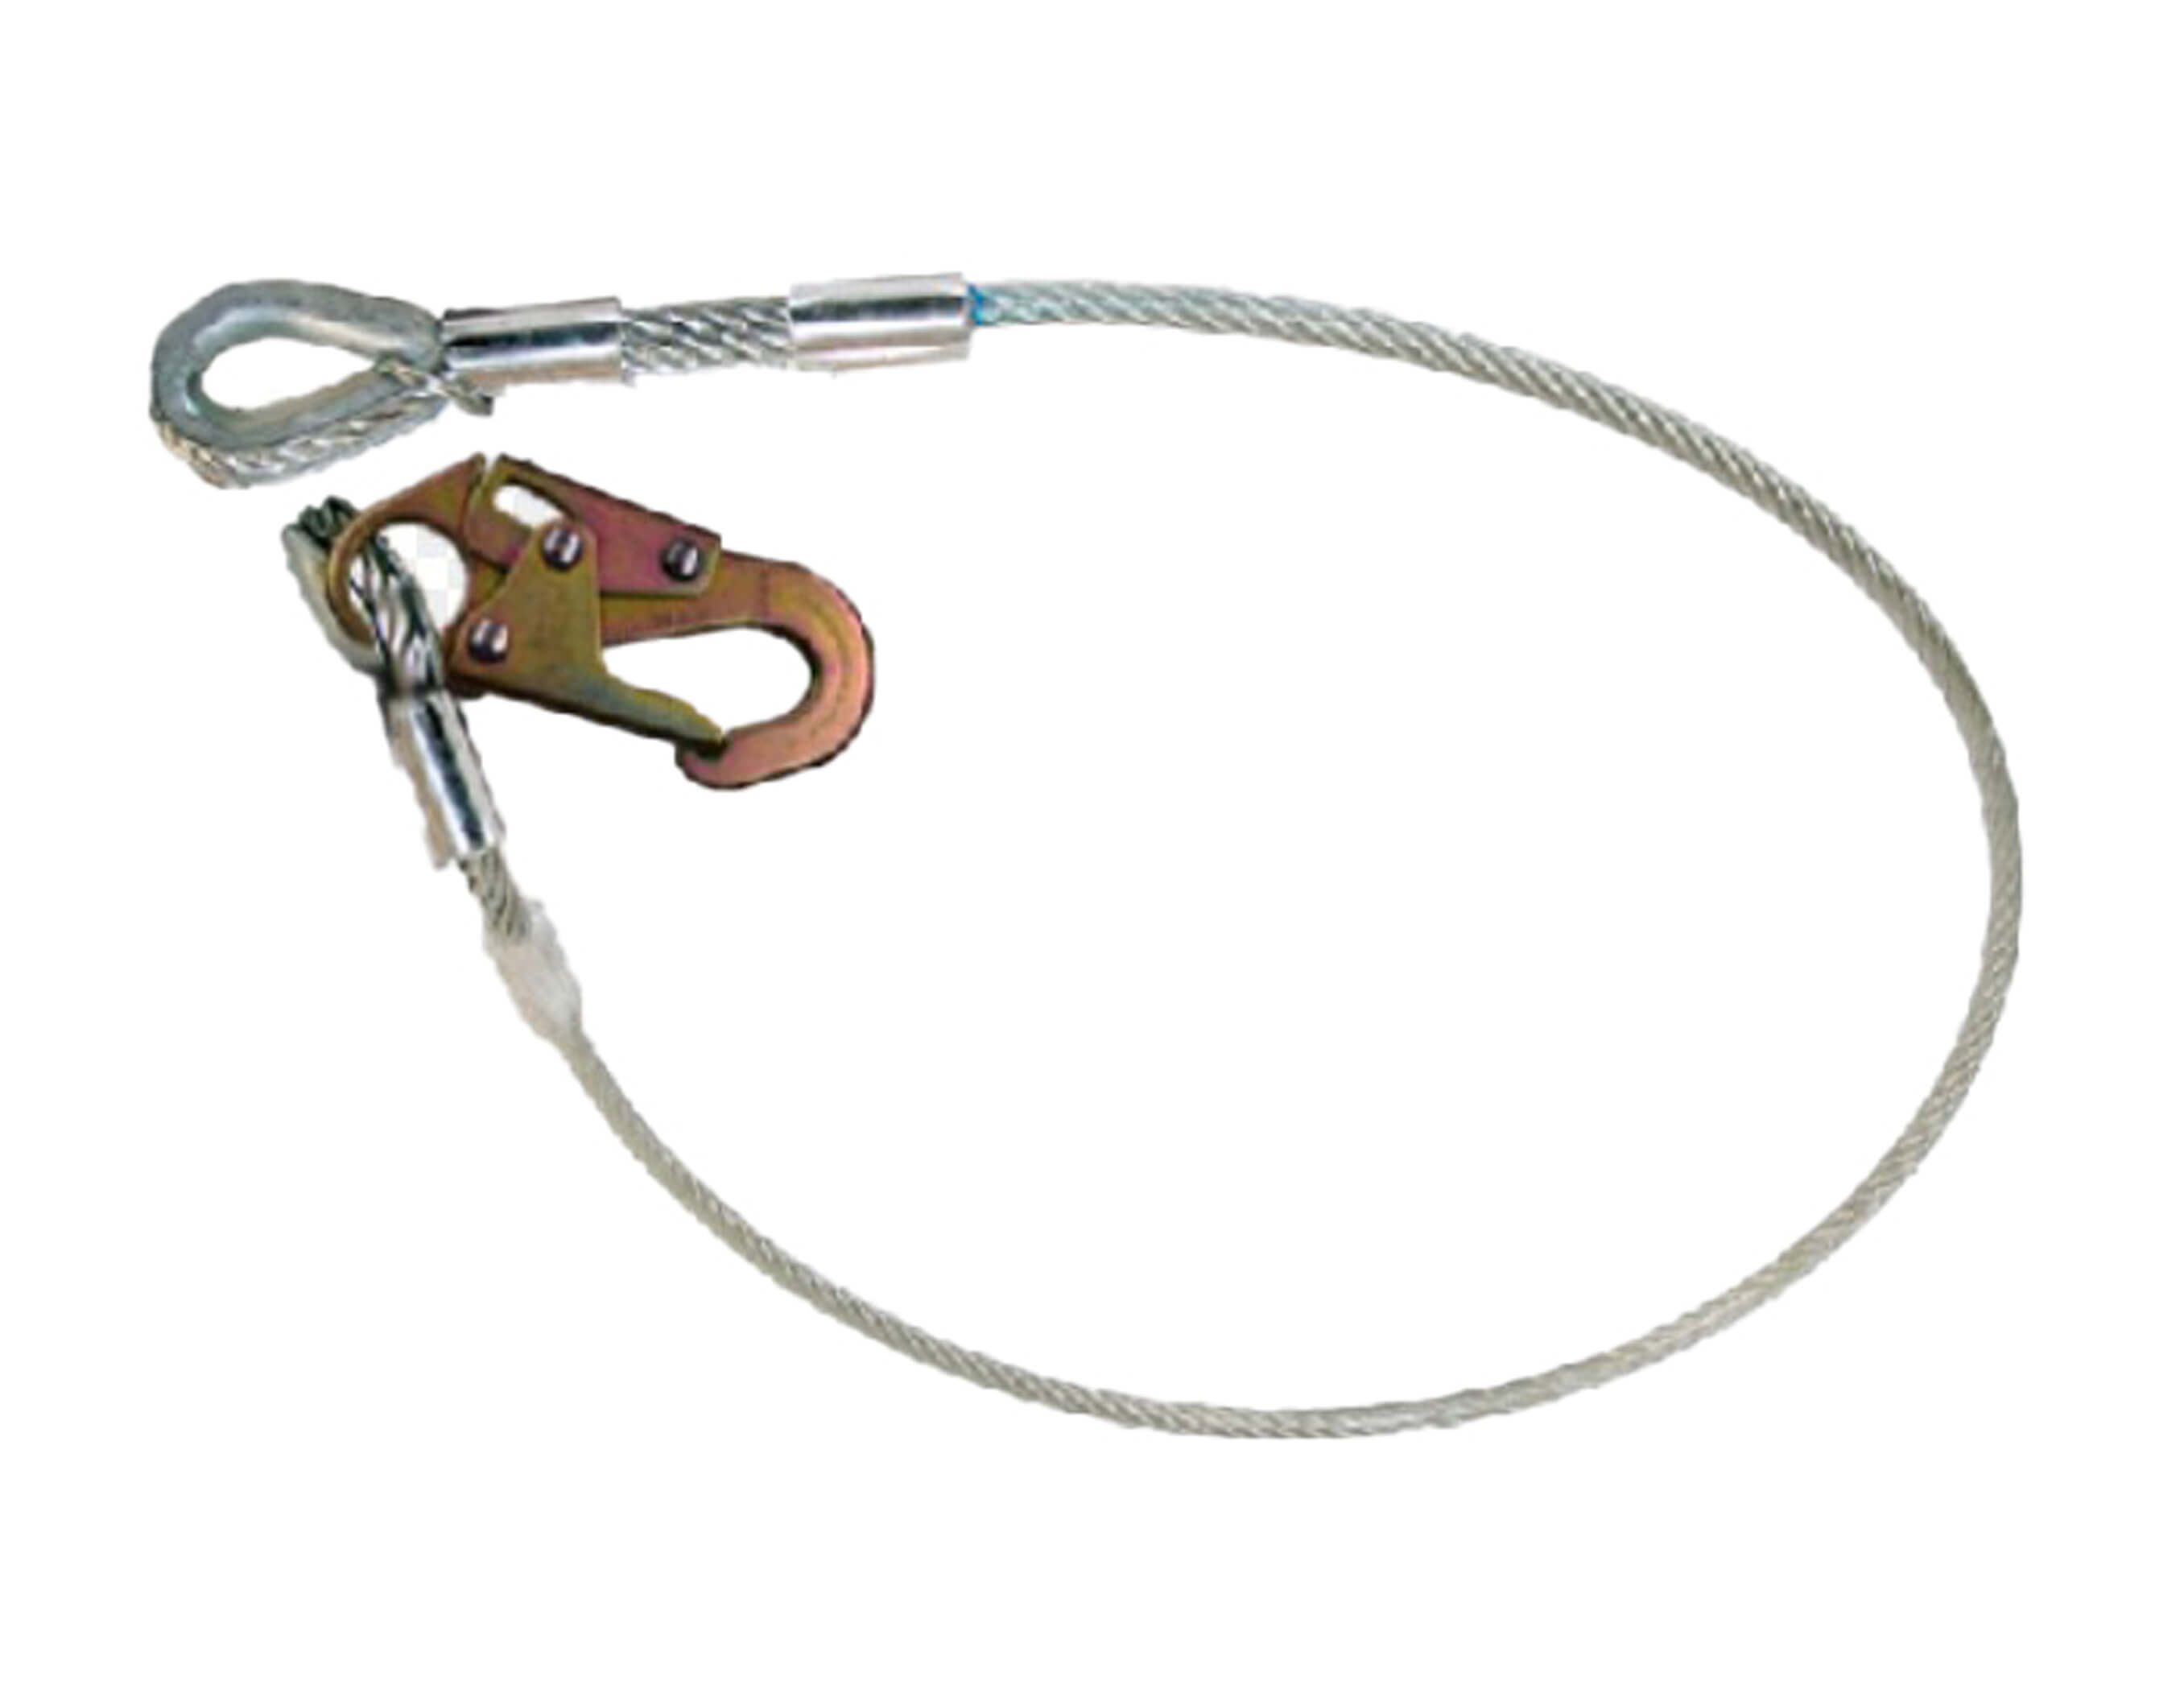 CABLE LANYARD WITH THIMBLE END